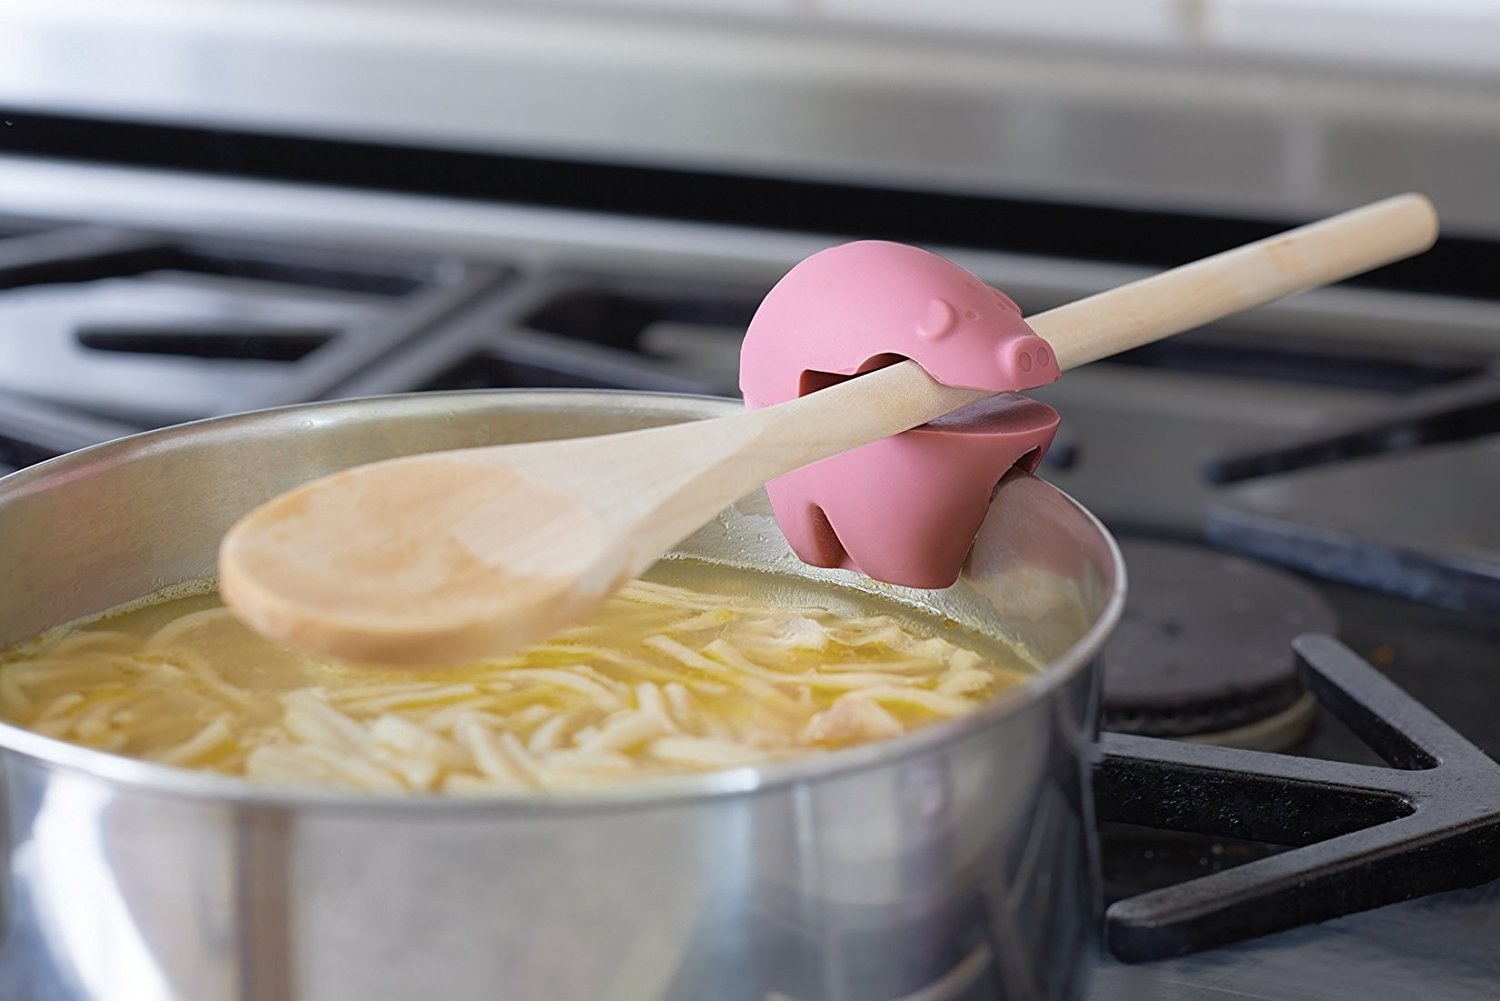 10 Cool Animal Themed Kitchen Tools - Design Swan